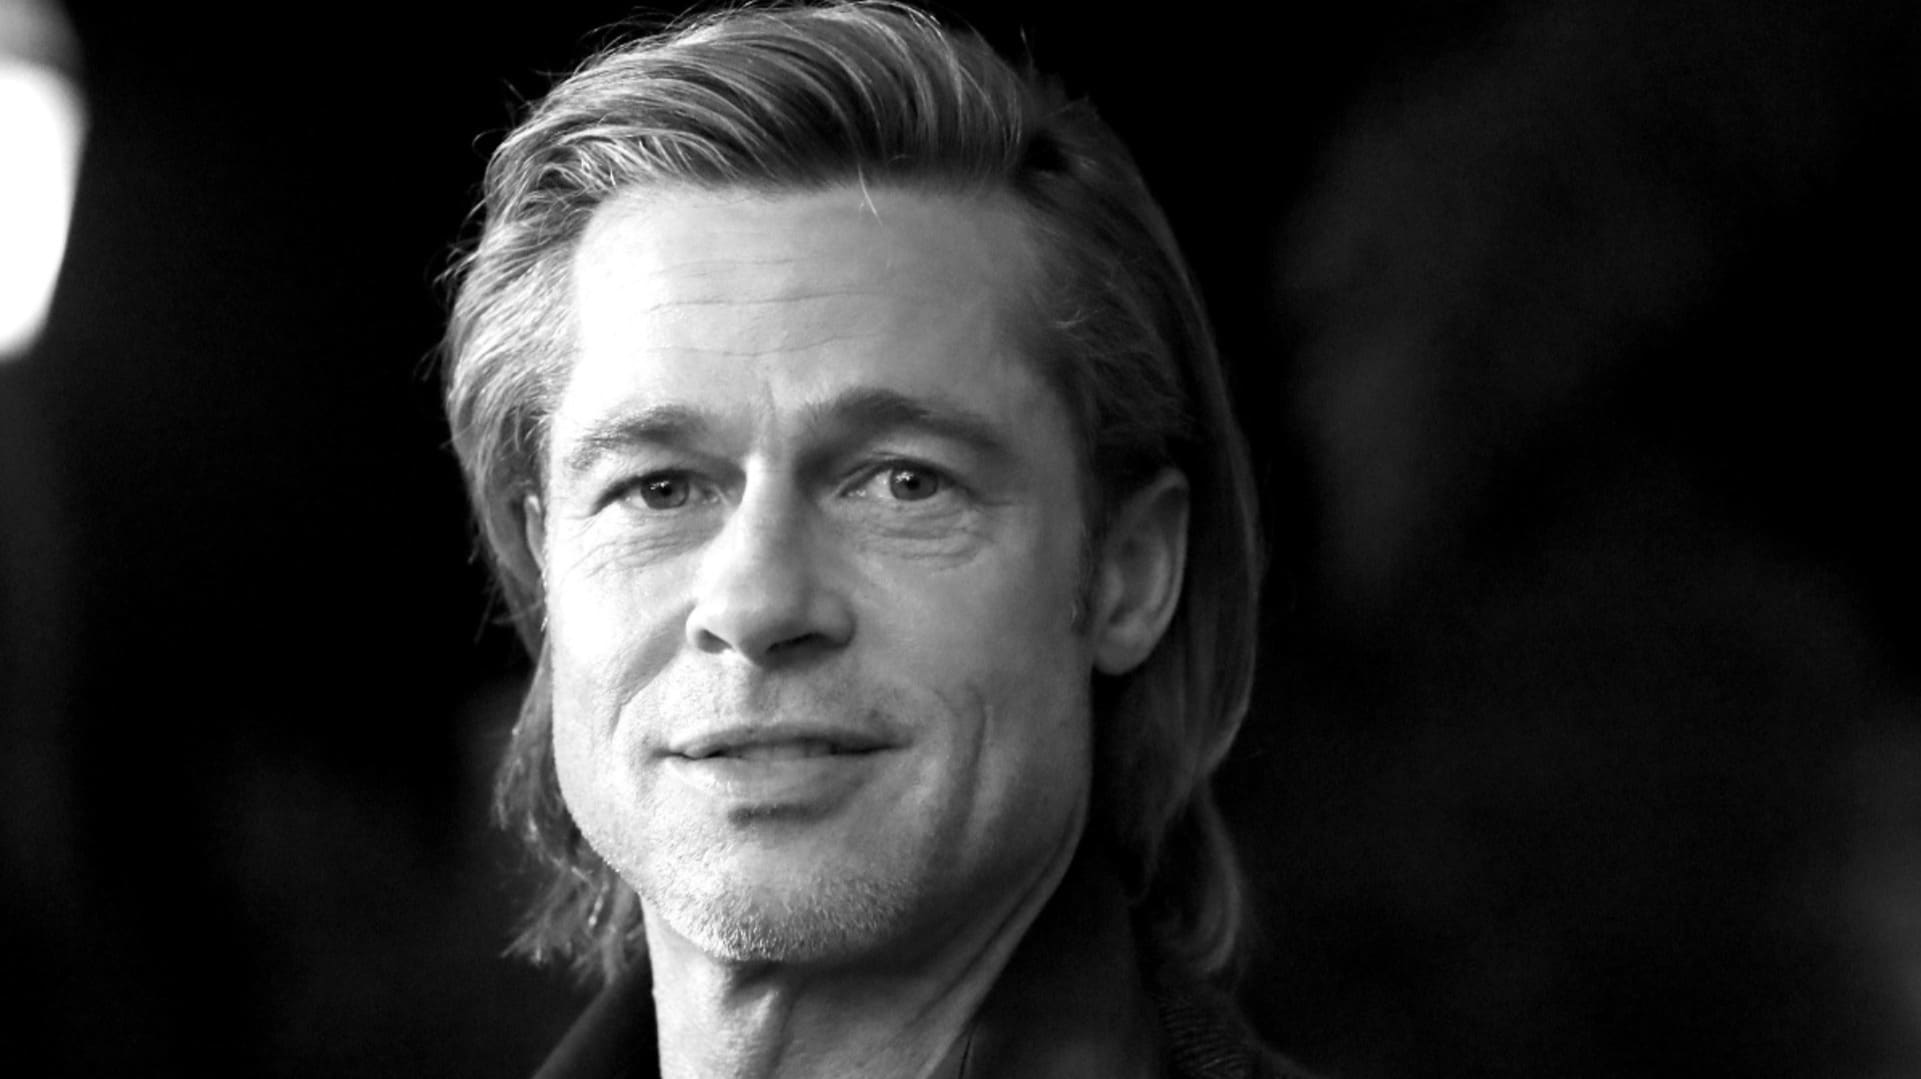 From Thelma & Louise to Once Upon A Time..., Brad Pitt as actor, star and supreme visual fetish